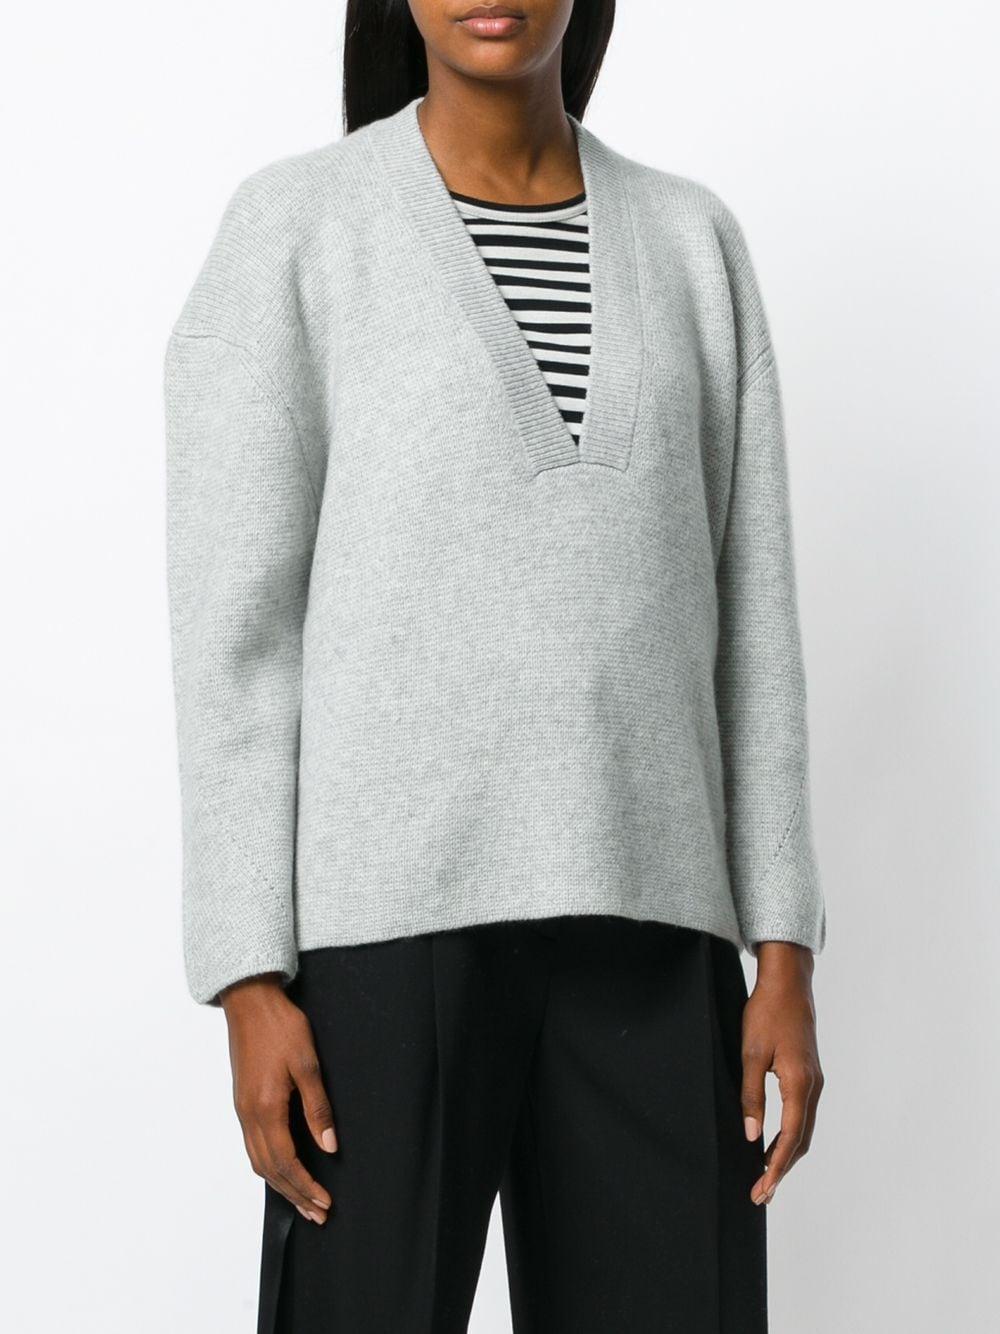 Le Kasha Cashmere Moscow Sweater in Grey (Gray) - Save 32% - Lyst